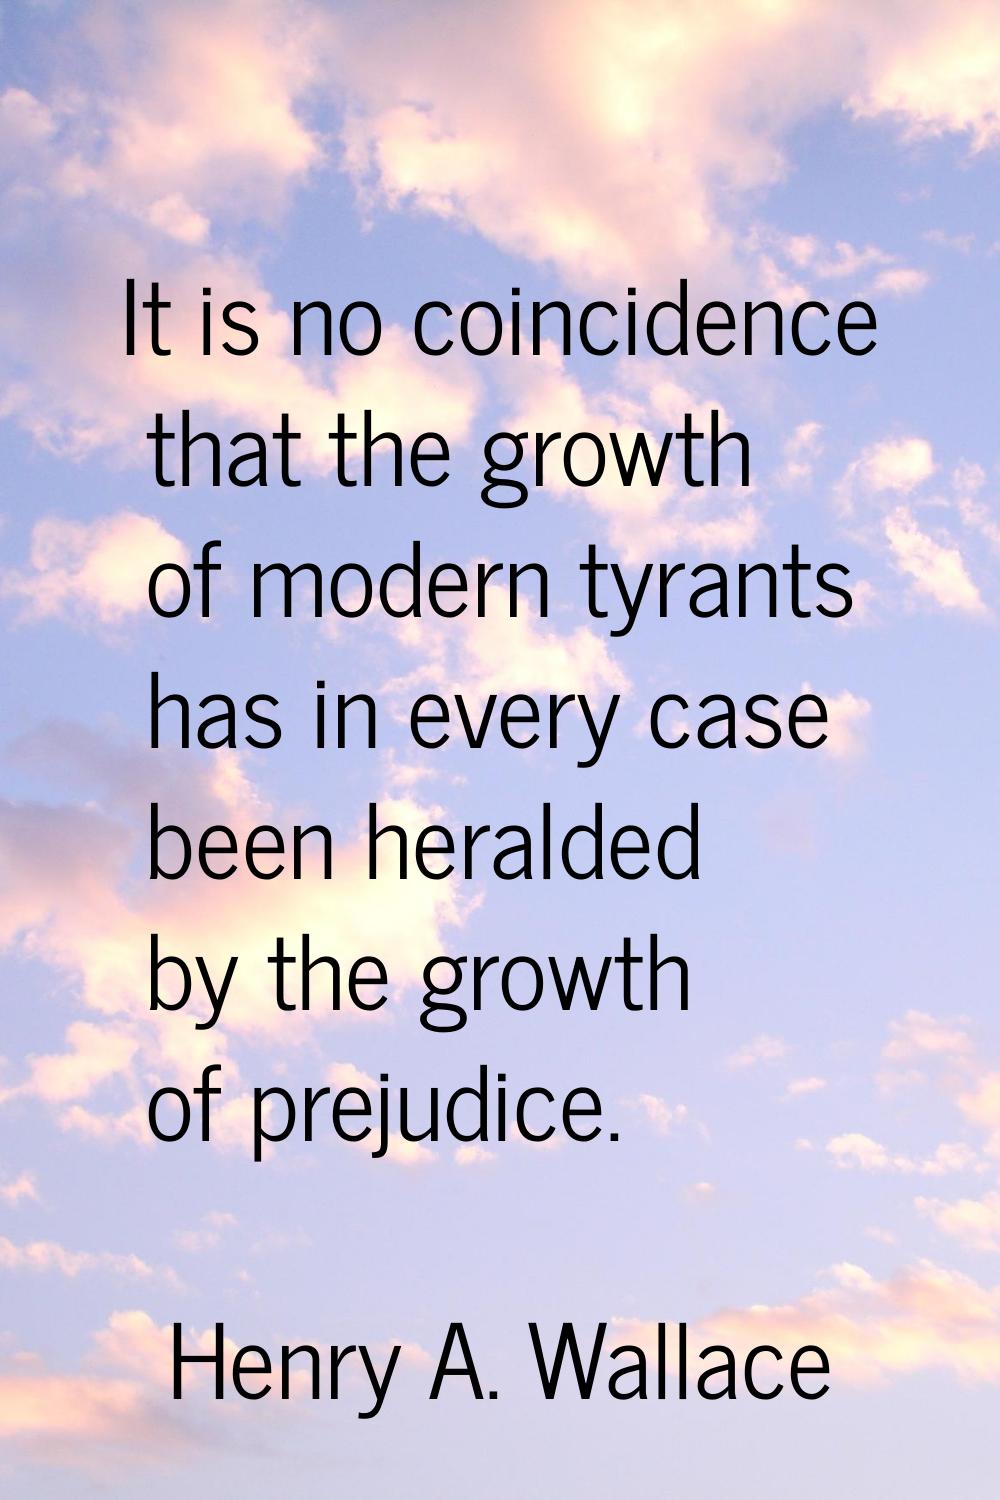 It is no coincidence that the growth of modern tyrants has in every case been heralded by the growt